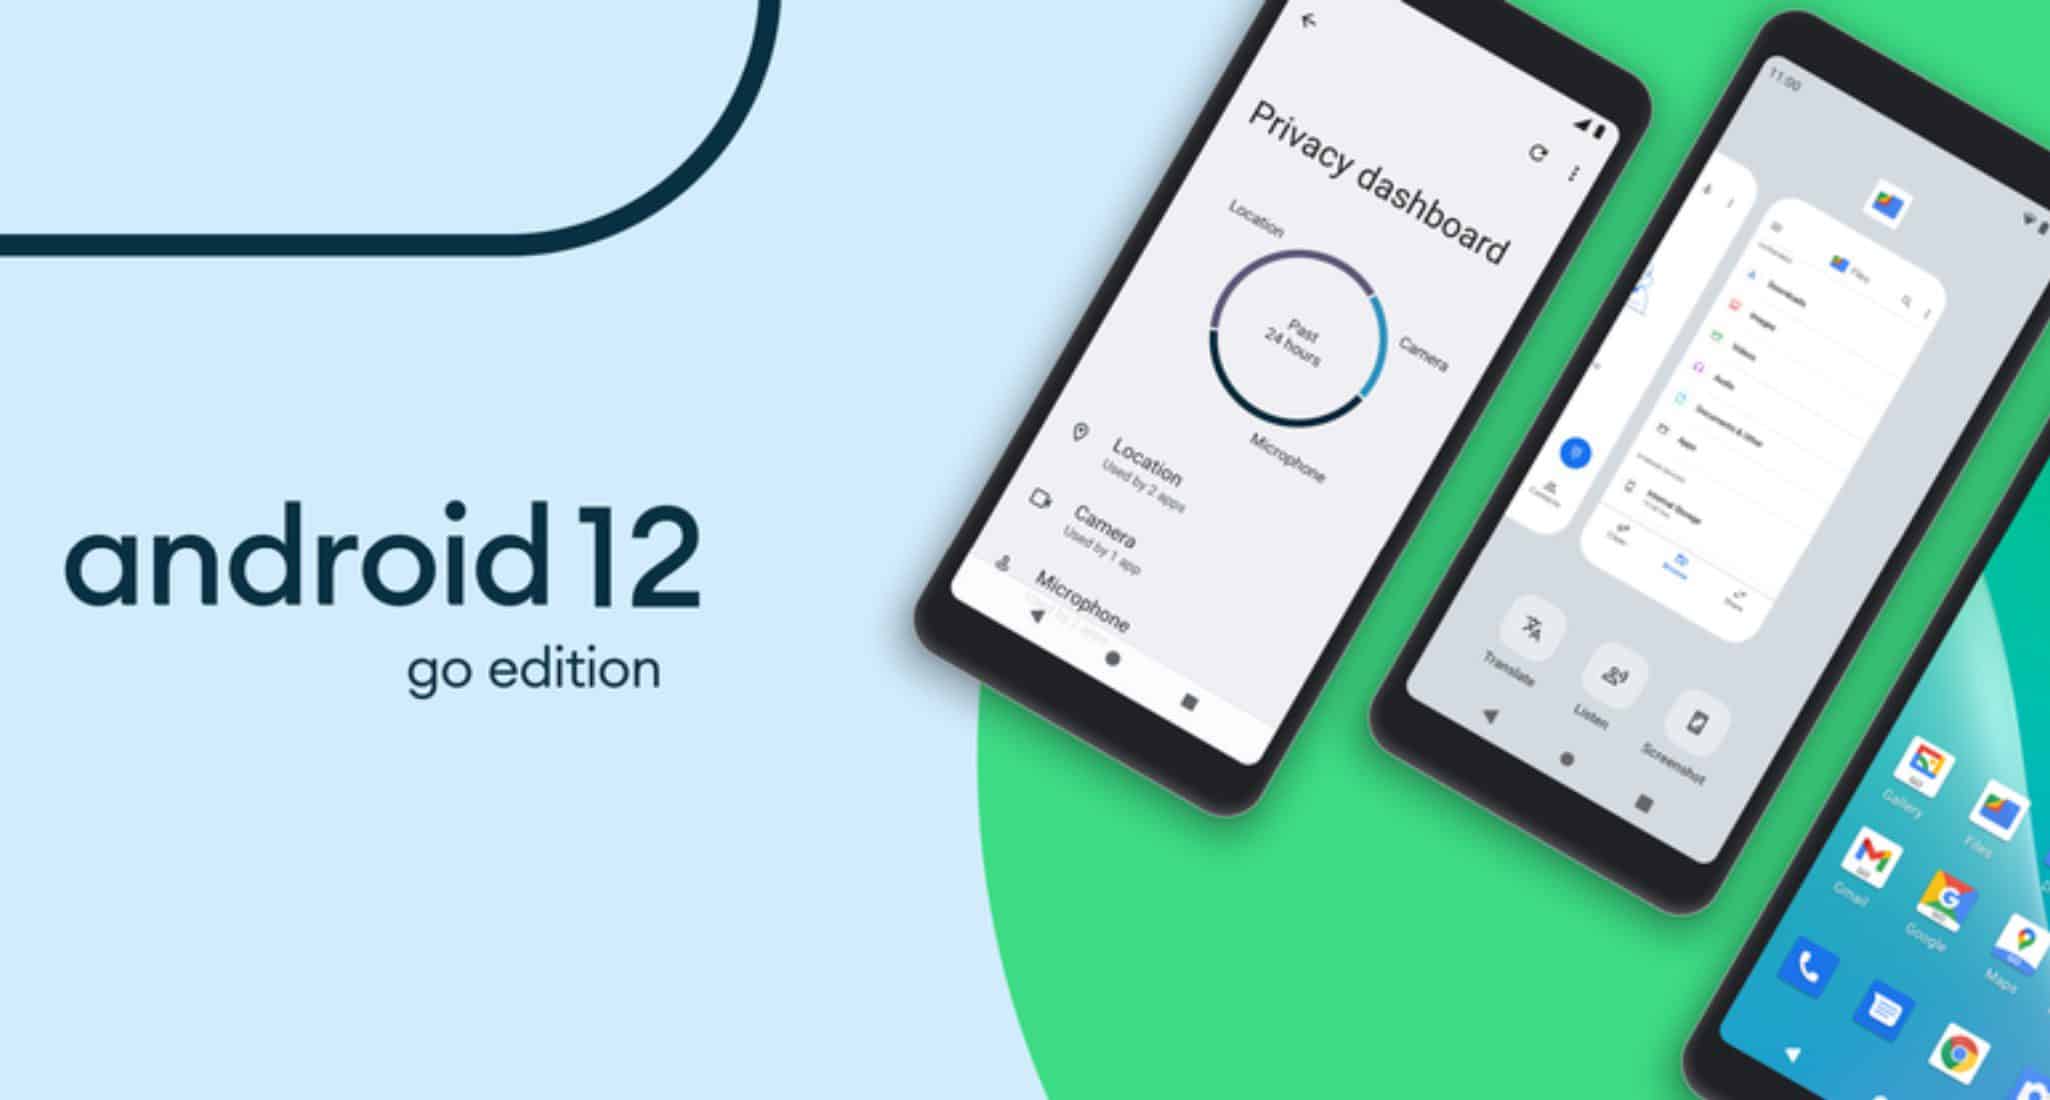 Google highlights new features coming to Android 12 Go edition